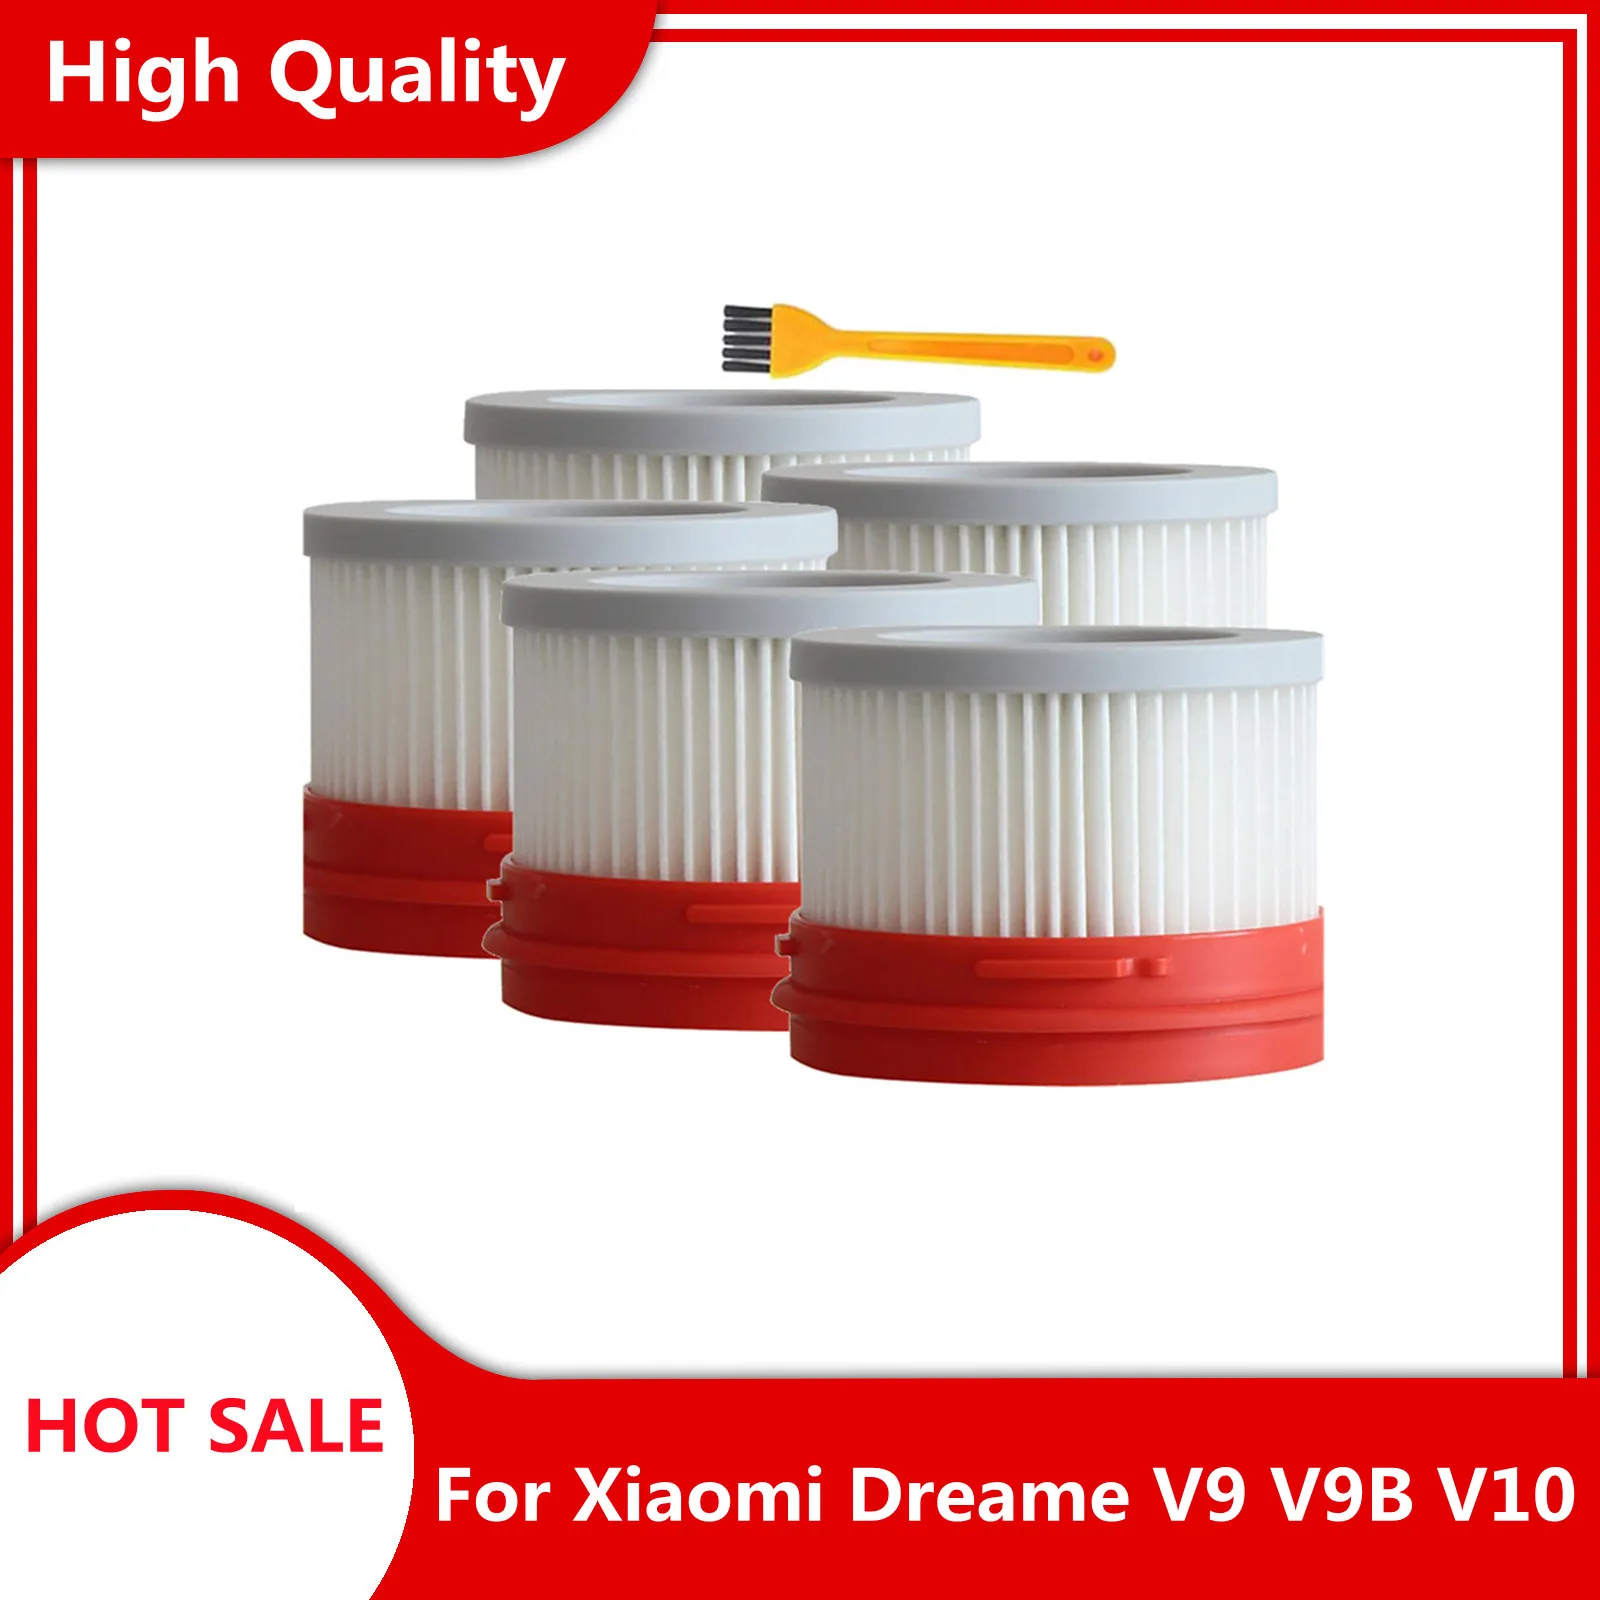 HEPA Filter For Xiaomi Dreame V9 V9B V10 Household Wireless Handheld Vacuum Cleaner Parts Dust Filter Replacement Filters for xiaomi g9 g10 handheld wireless dust collection spare parts hepa filter screen filter cotton